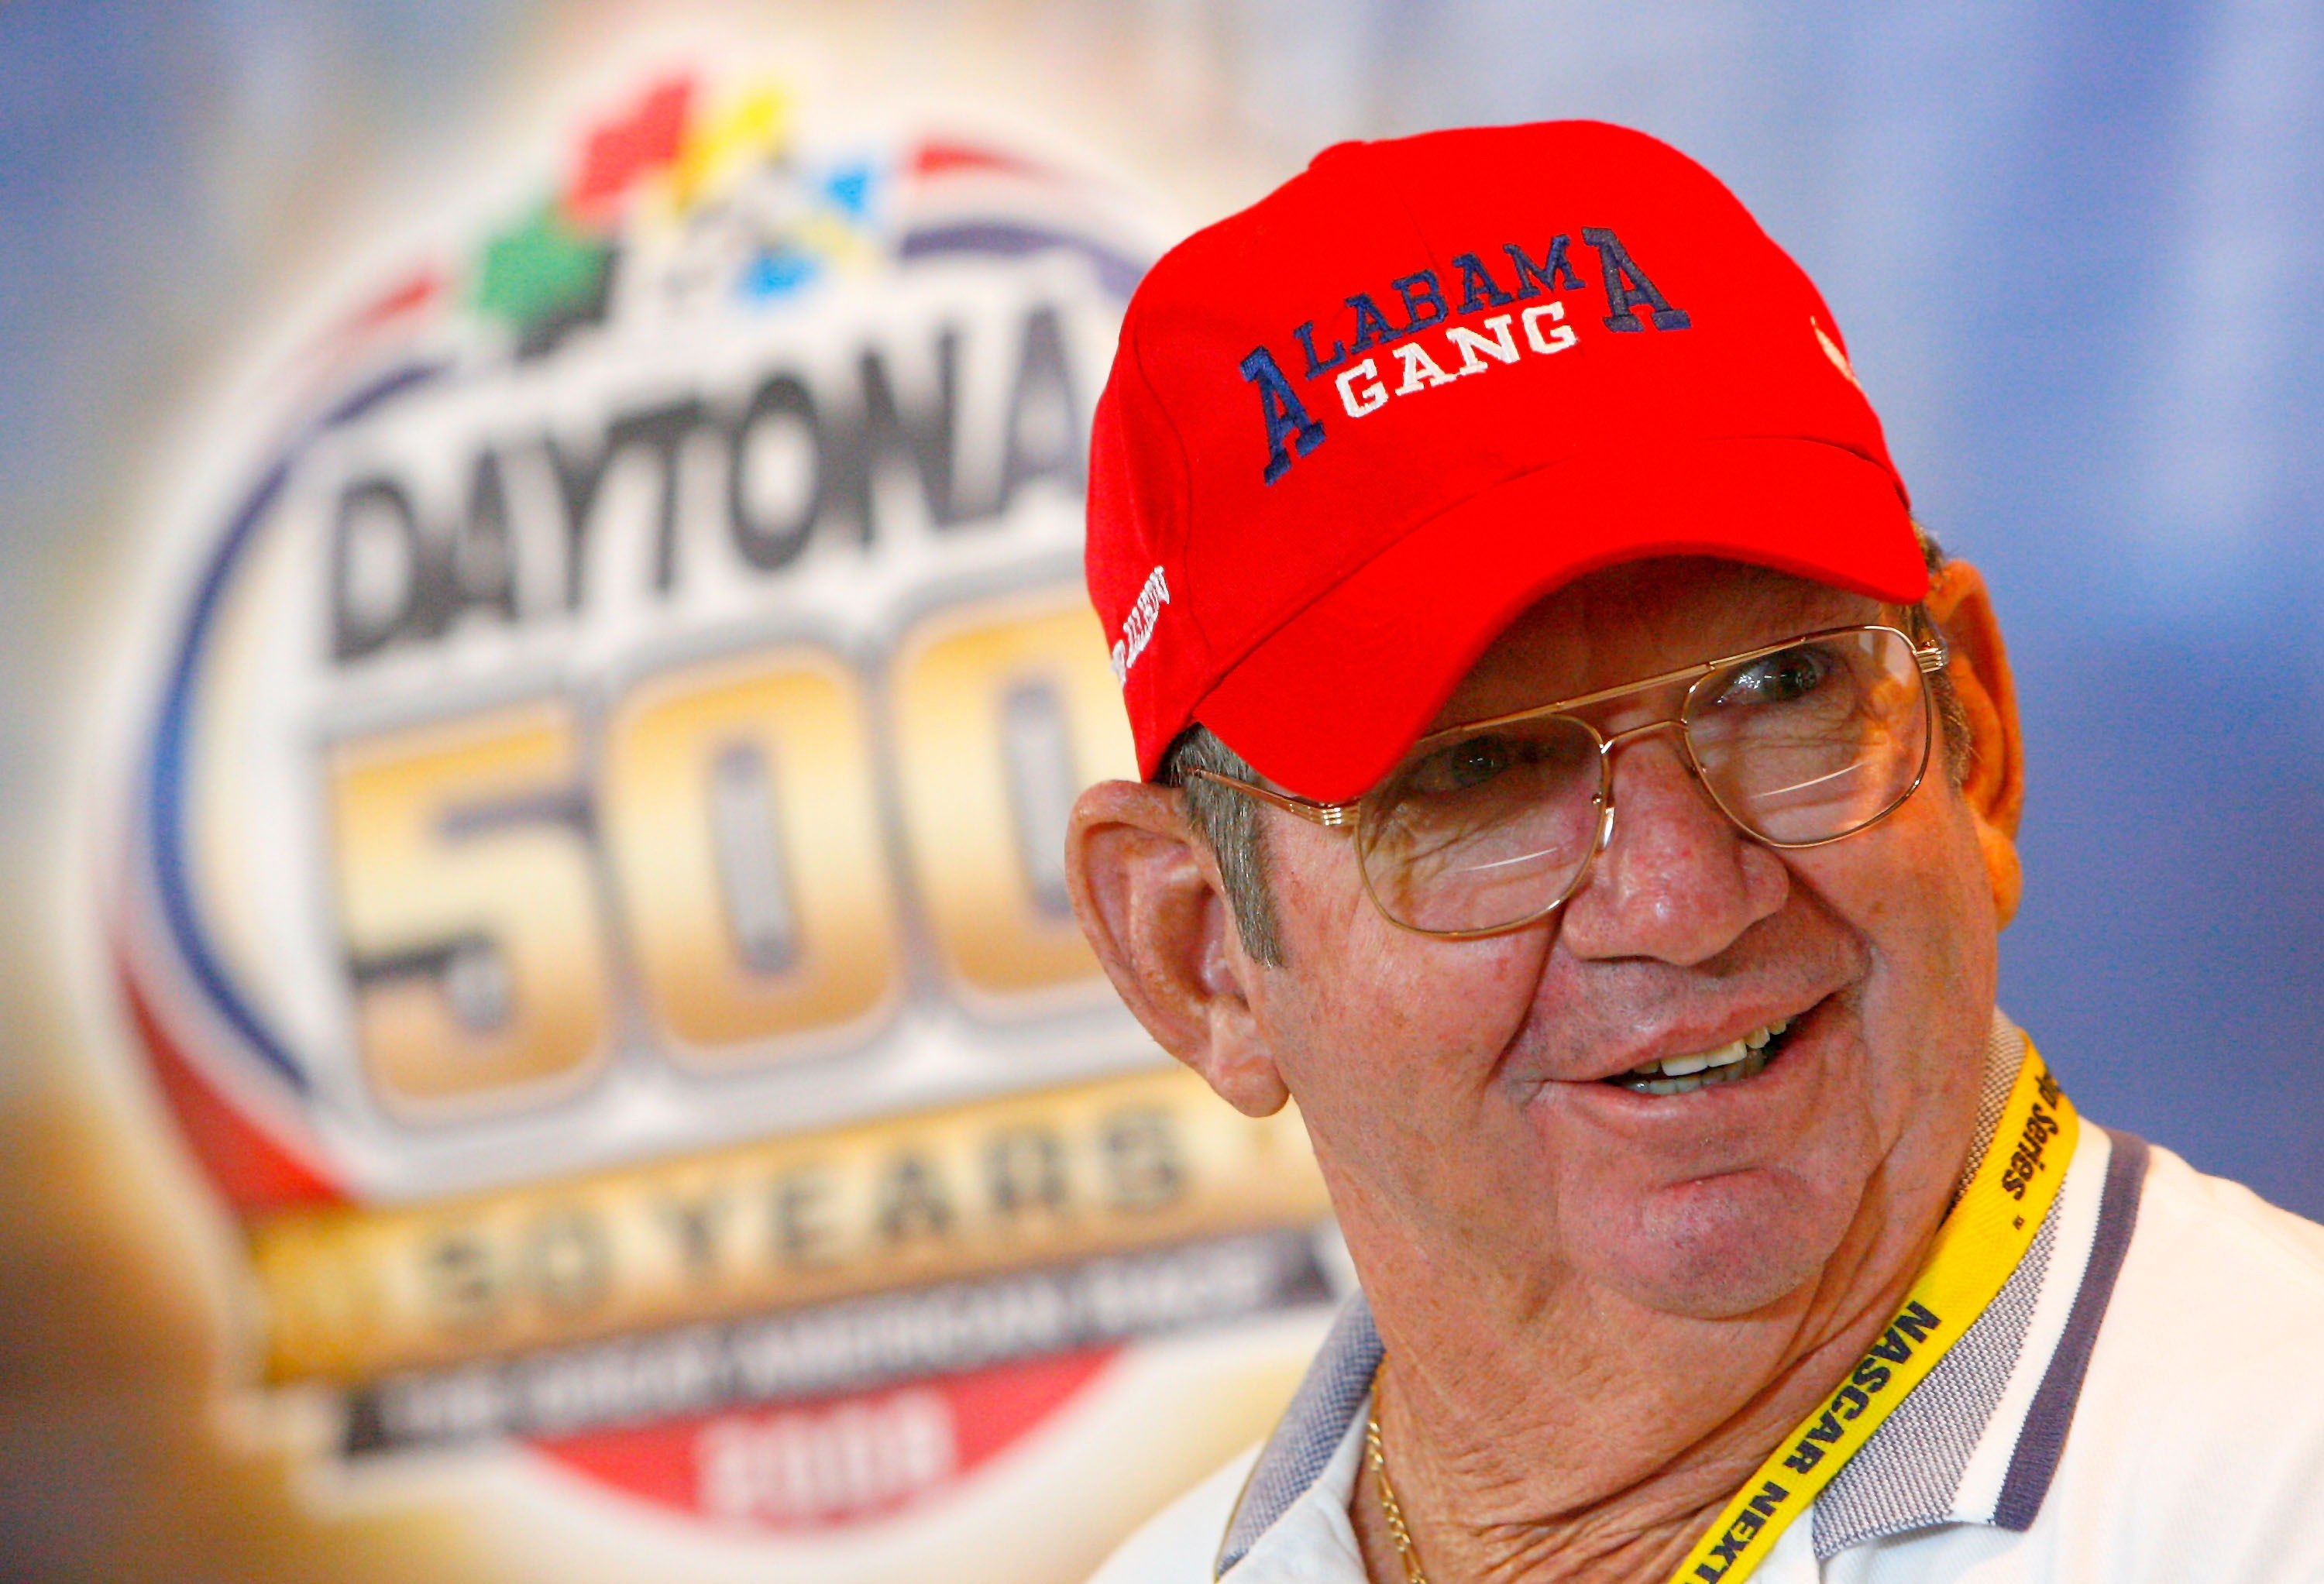 TALLADEGA, AL - OCTOBER 05:  Former NASCAR driver Donnie Allison, looks on during a press conference at Talladega Superspeedway on October 5, 2007 in Talladega, Alabama.  (Photo by Rusty Jarrett/Getty Images for NASCAR)